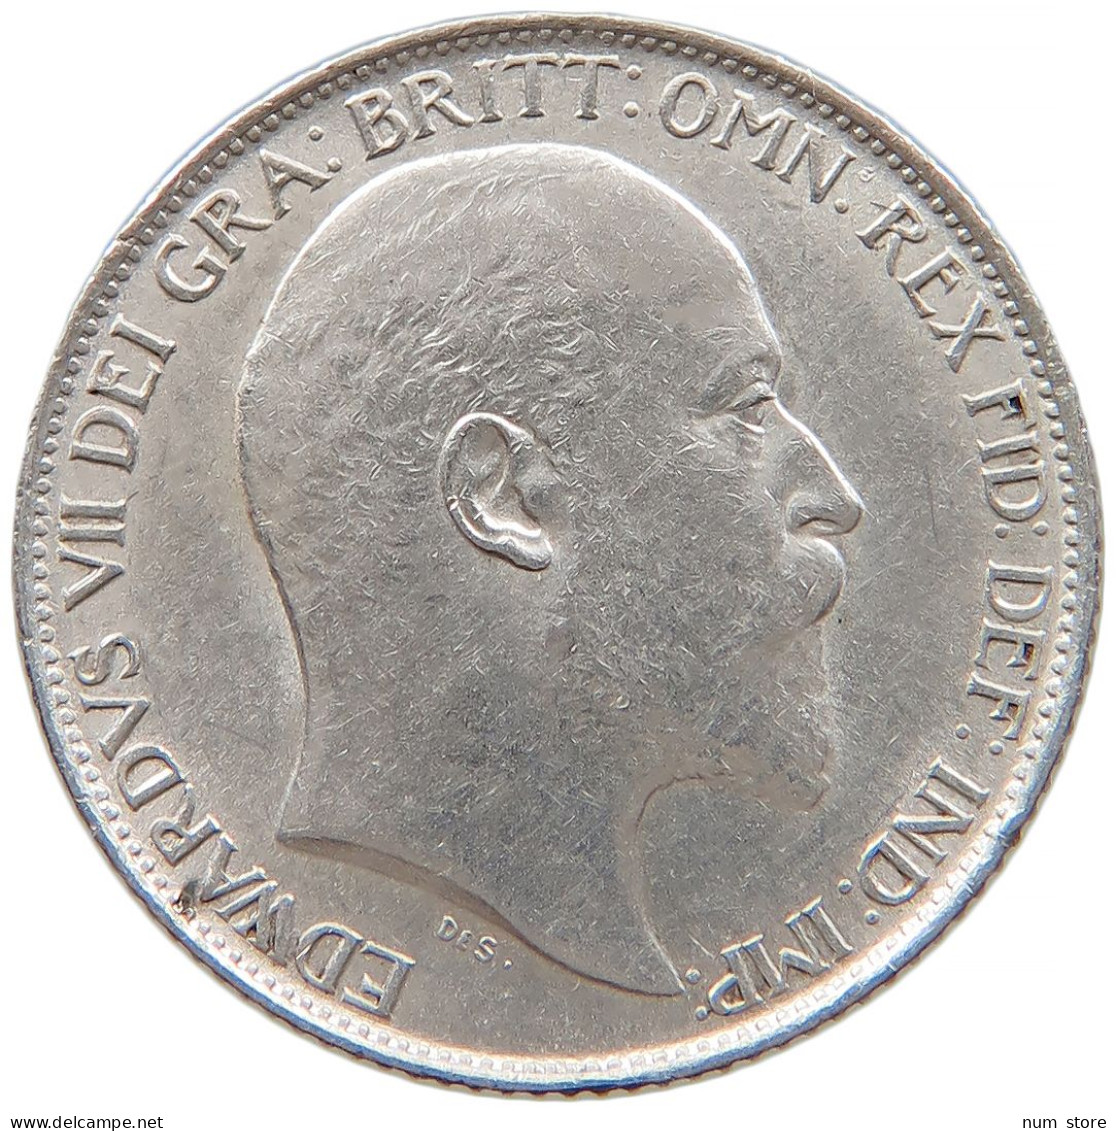 GREAT BRITAIN SIXPENCE 1905 Edward VII. (1901 - 1910) #t022 0601 - H. 6 Pence